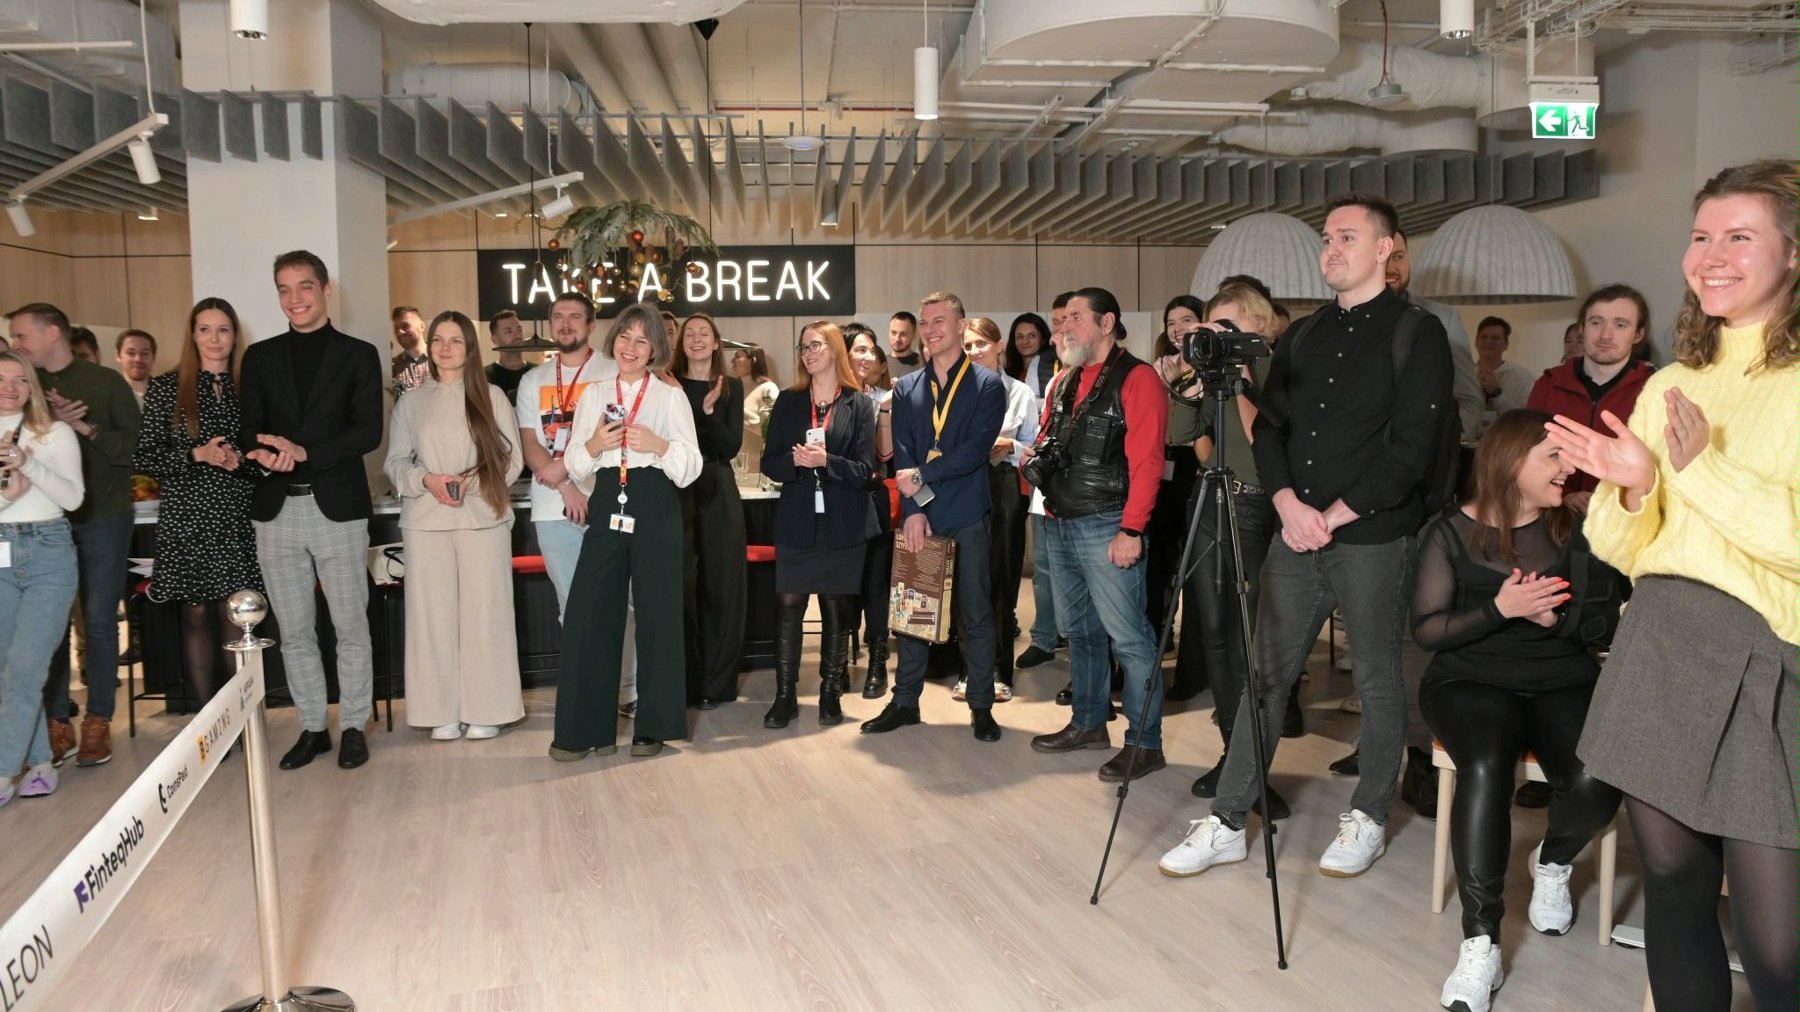 The photo shows a group of people attending the opening of the SOFTSWISS office. The individuals are smiling, clapping. They are facing an unseen stage.